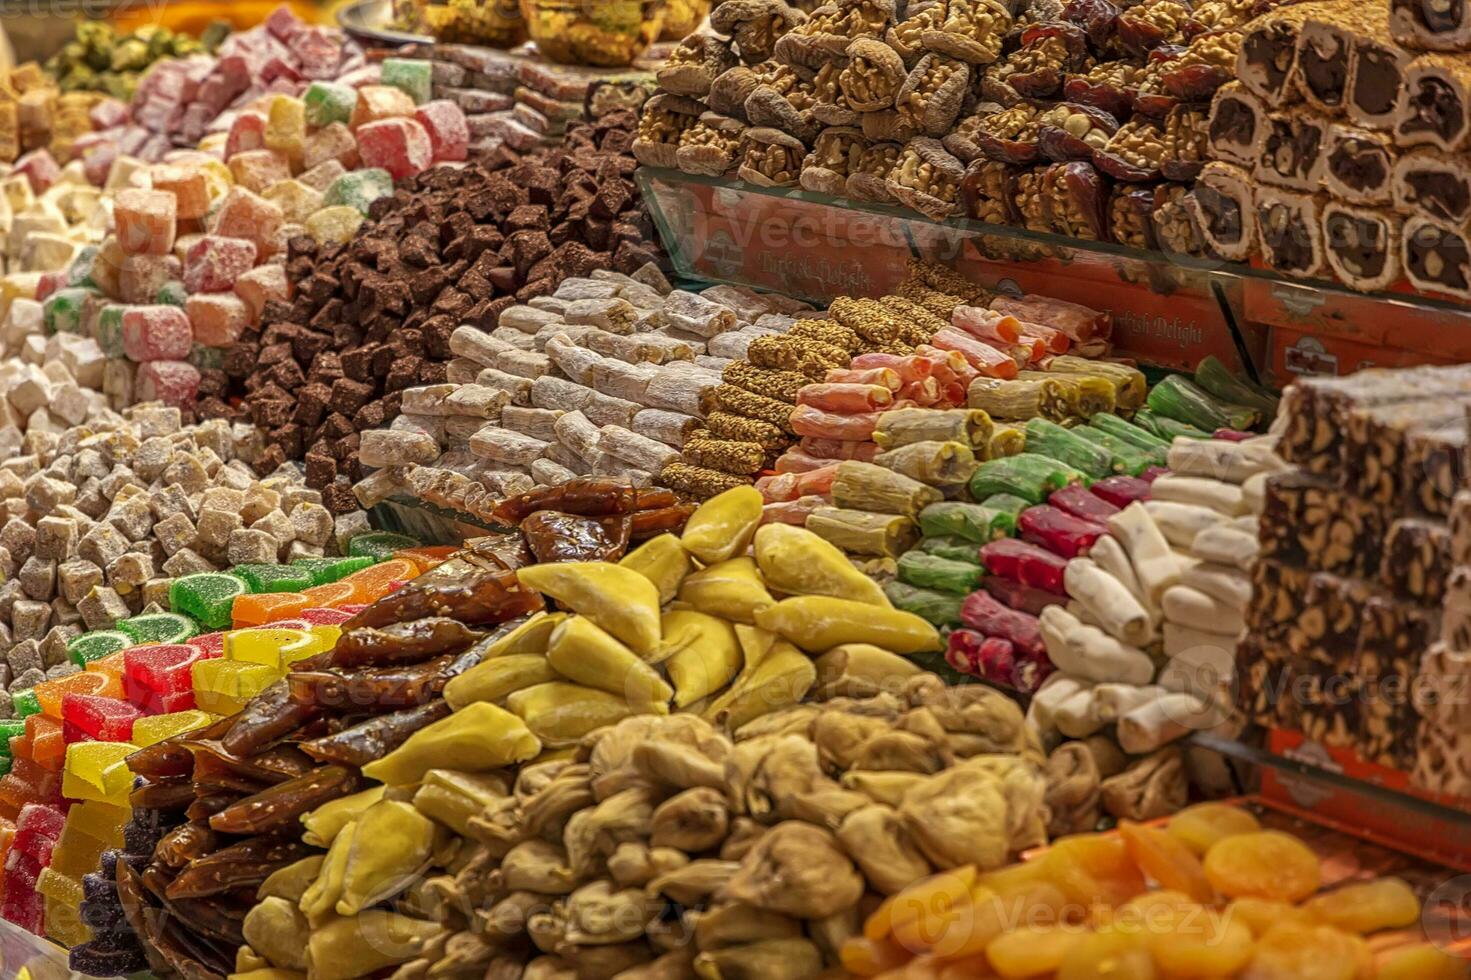 Many different sweets in the market. Horizontal view photo